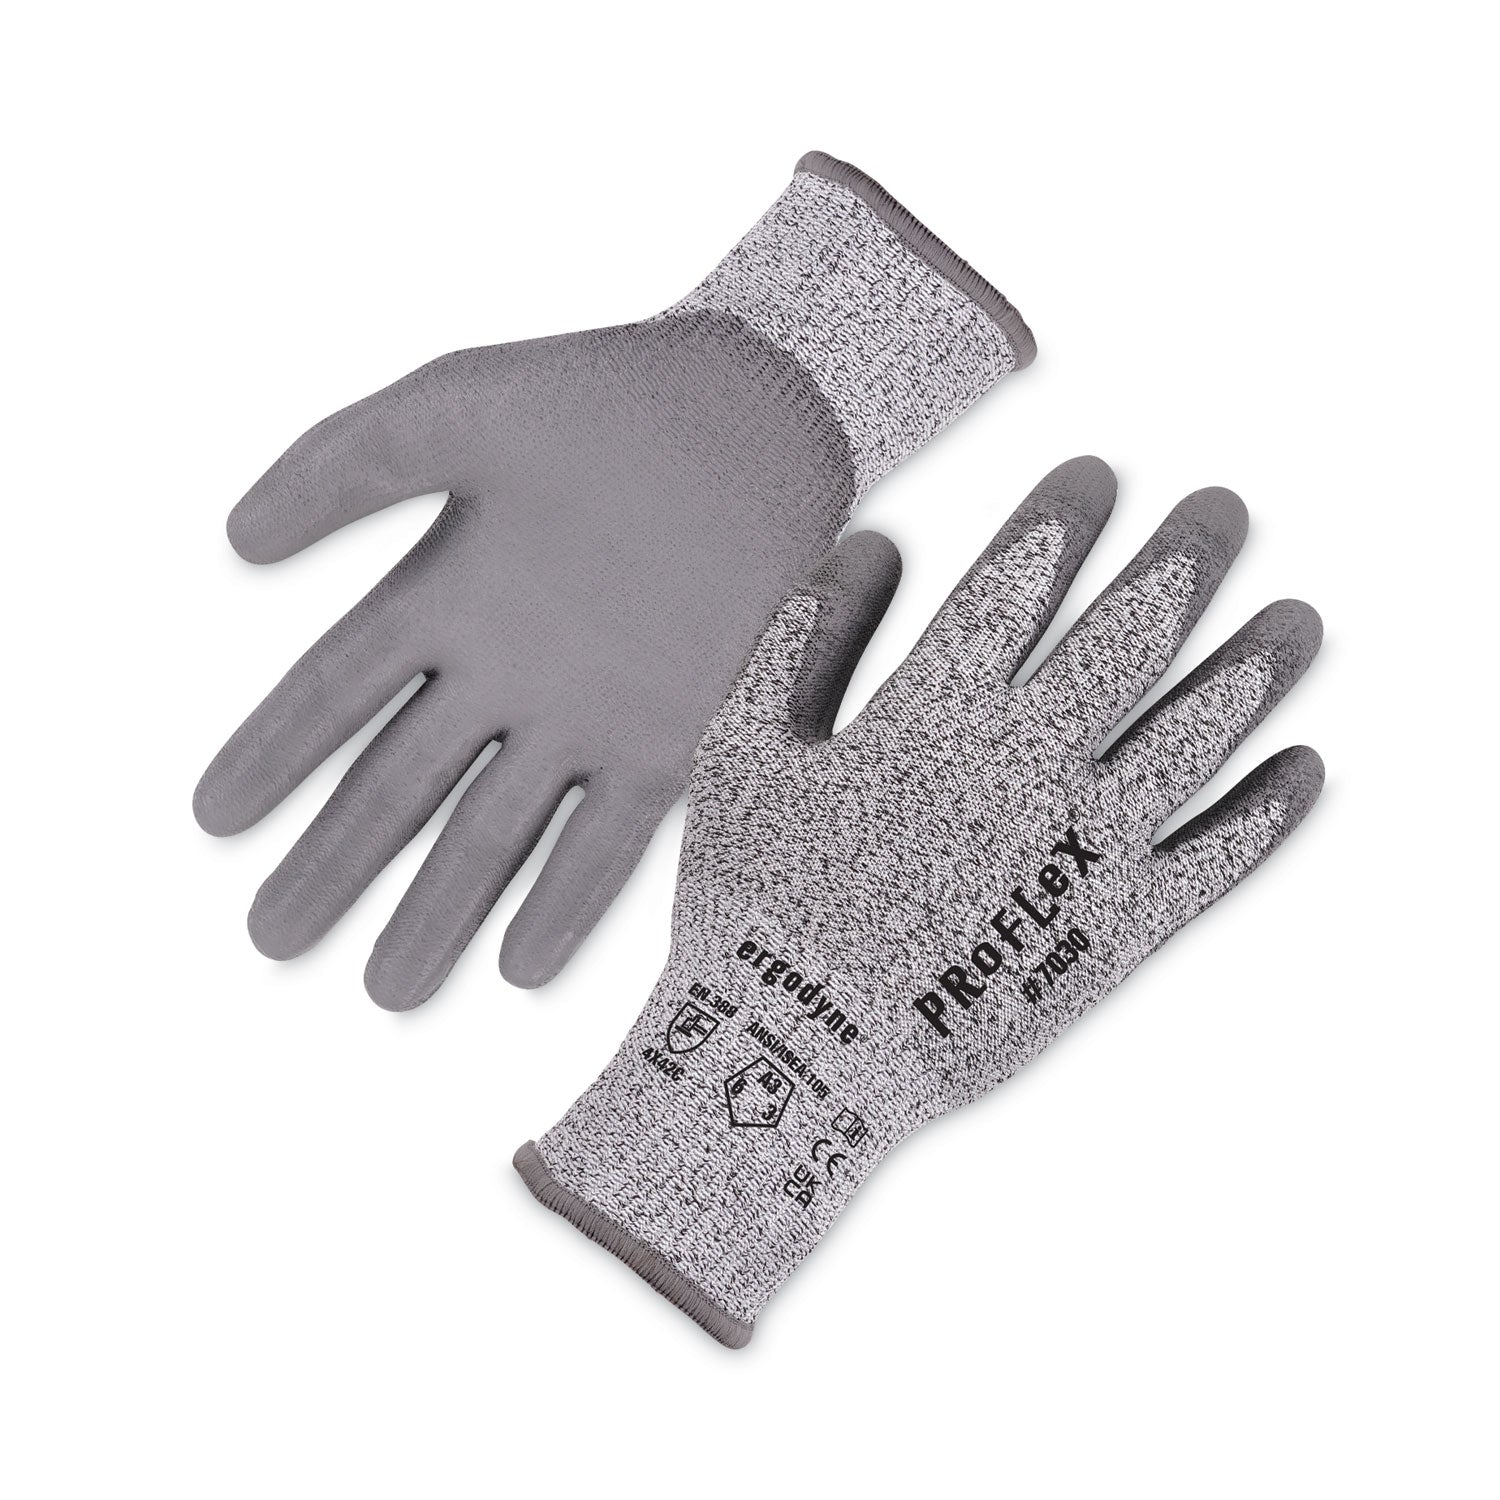 proflex-7030-ansi-a3-pu-coated-cr-gloves-gray-x-large-12-pairs-pack-ships-in-1-3-business-days_ego10455 - 1